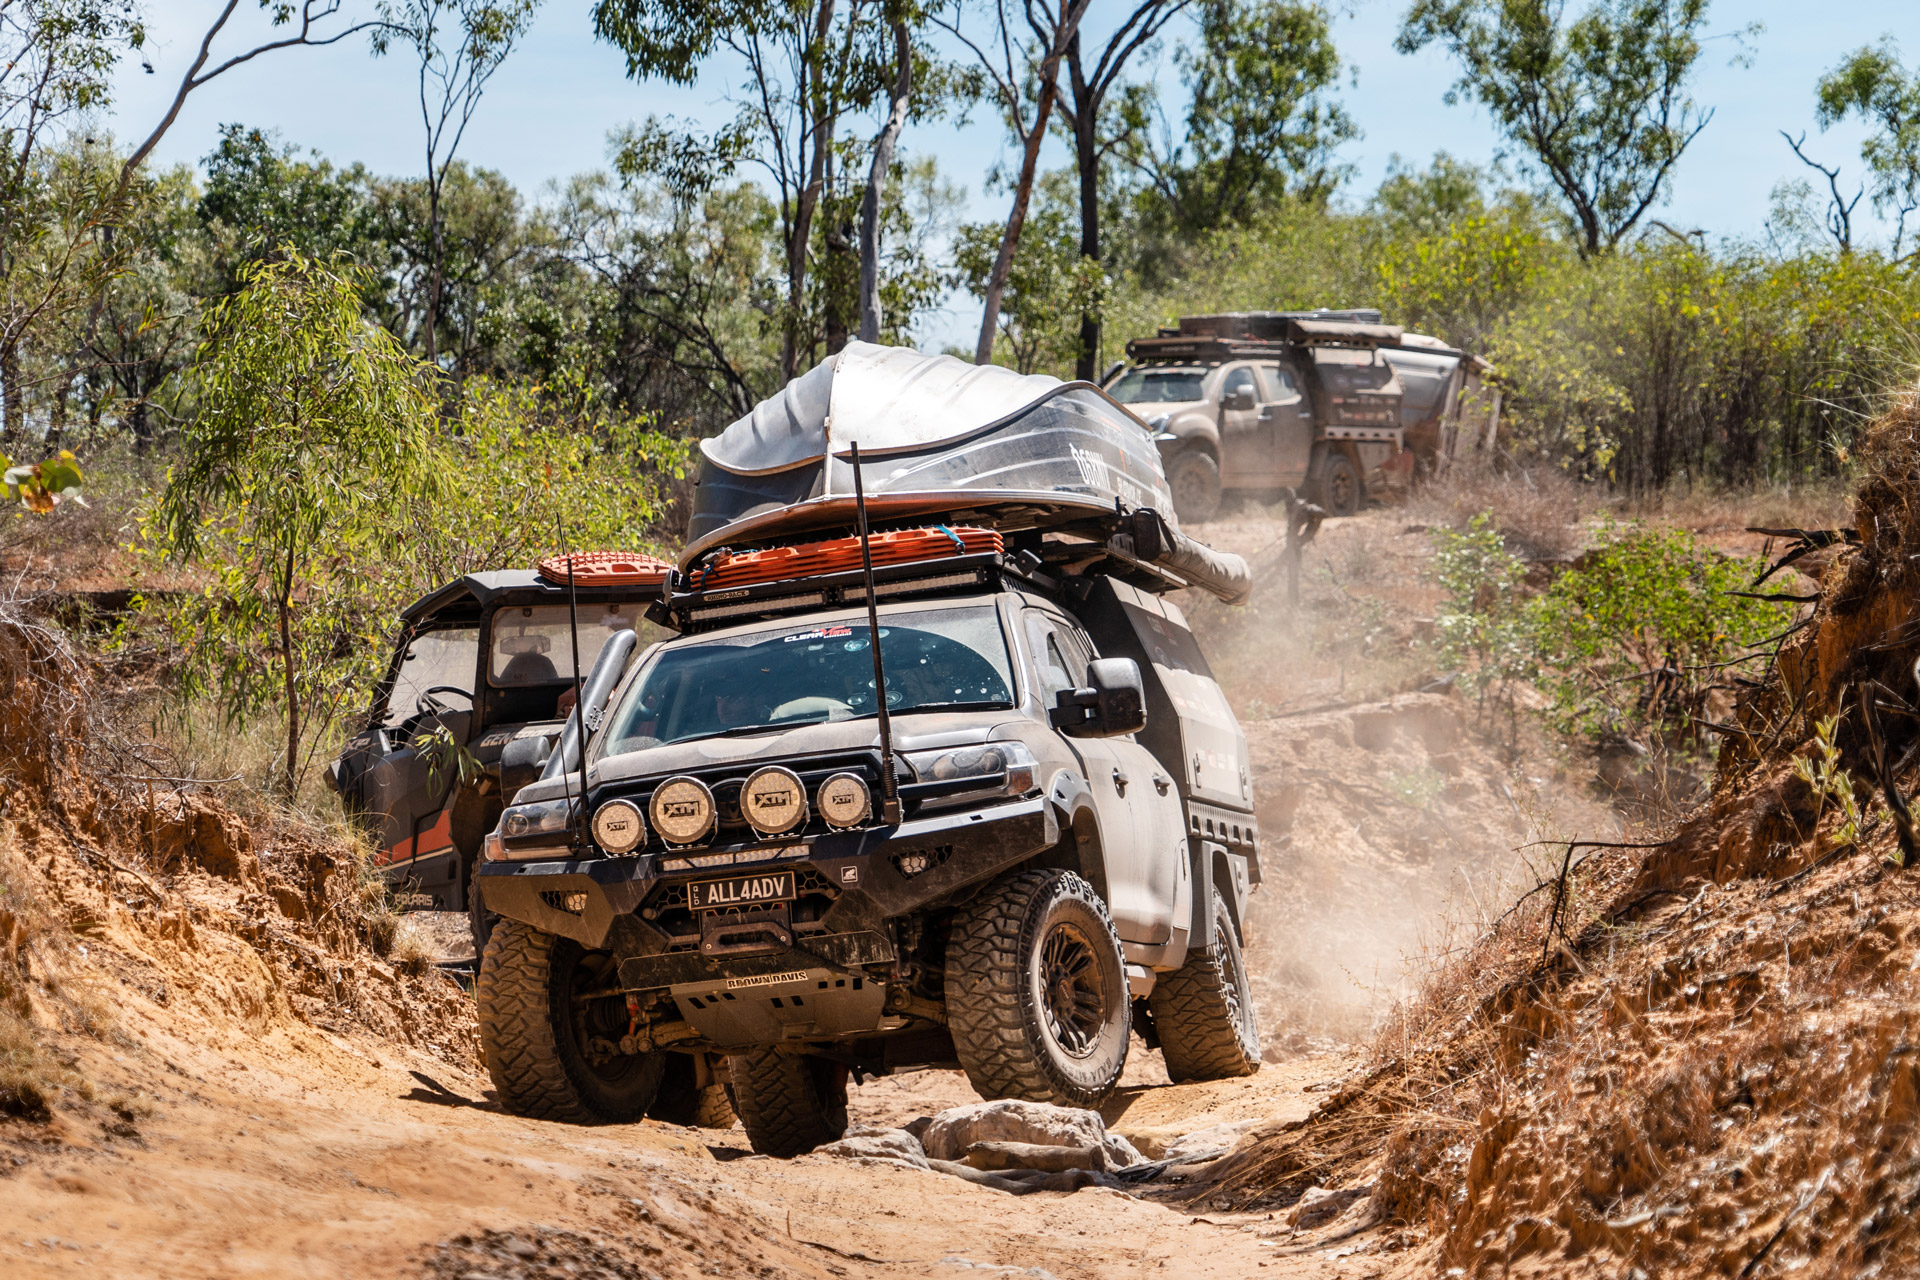 All 4 Adventure LandCruiser offroading with Vapour wheels